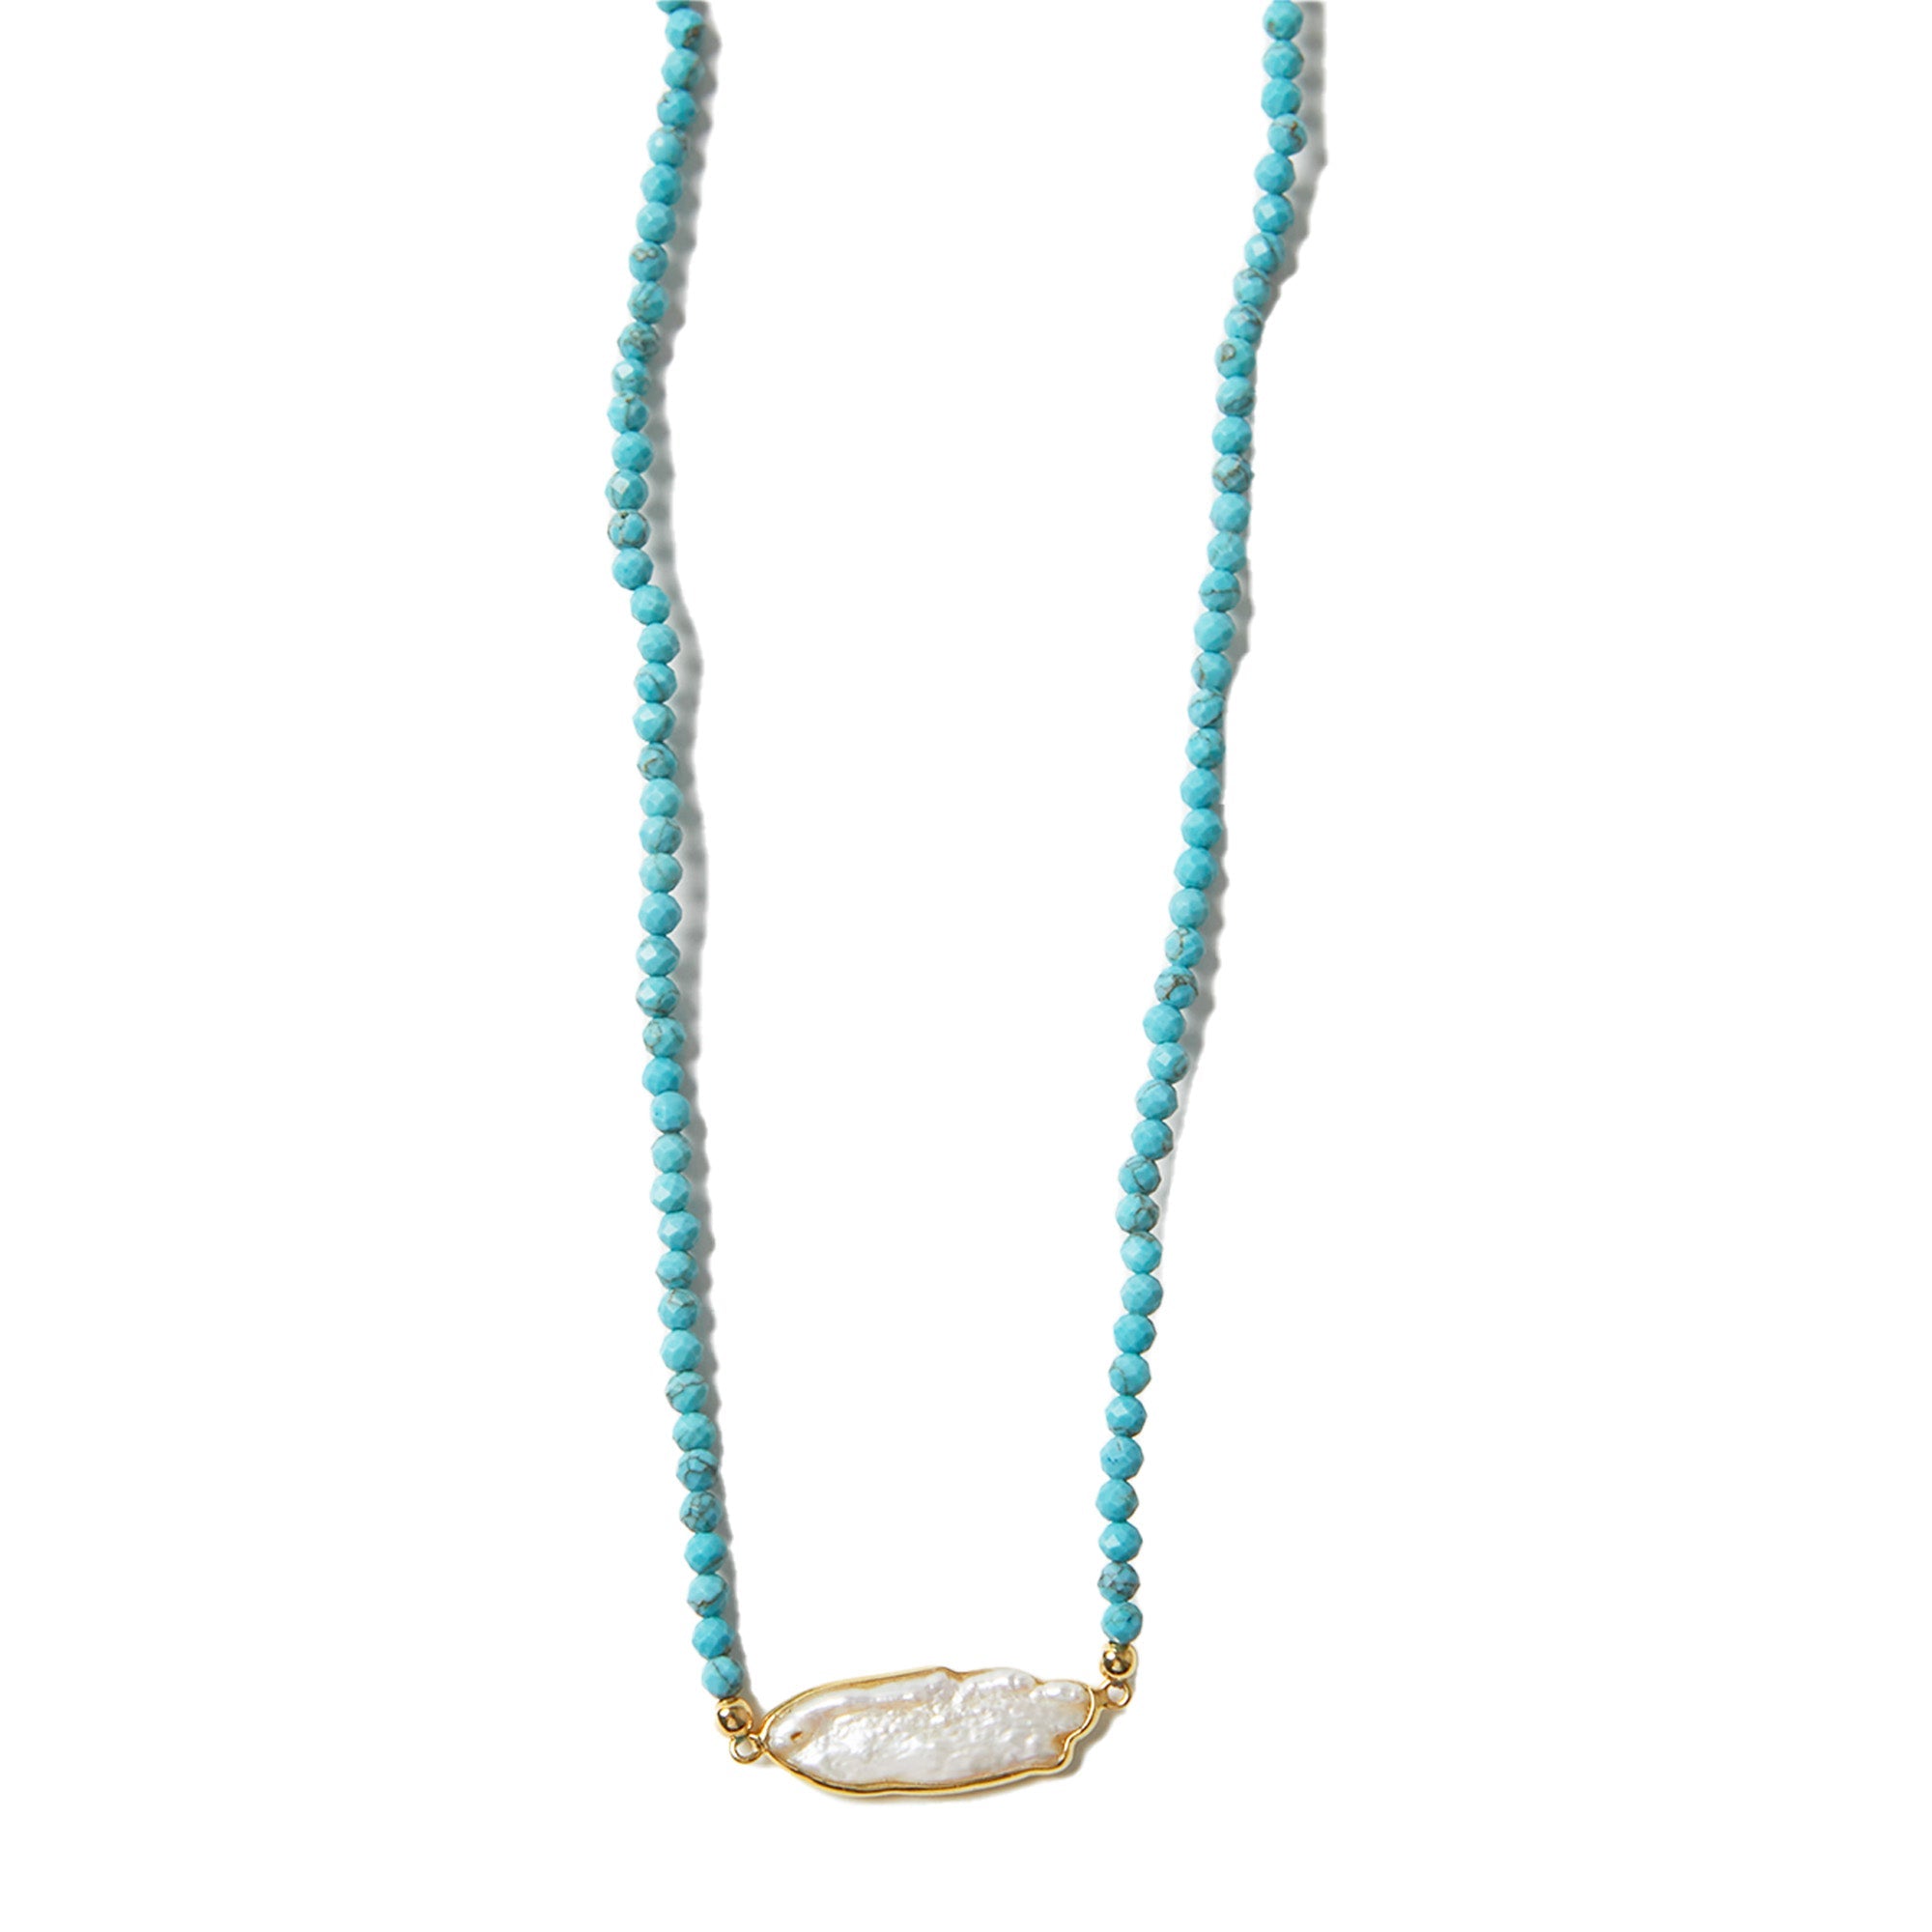 THE PEARL BEZELED NECKLACE